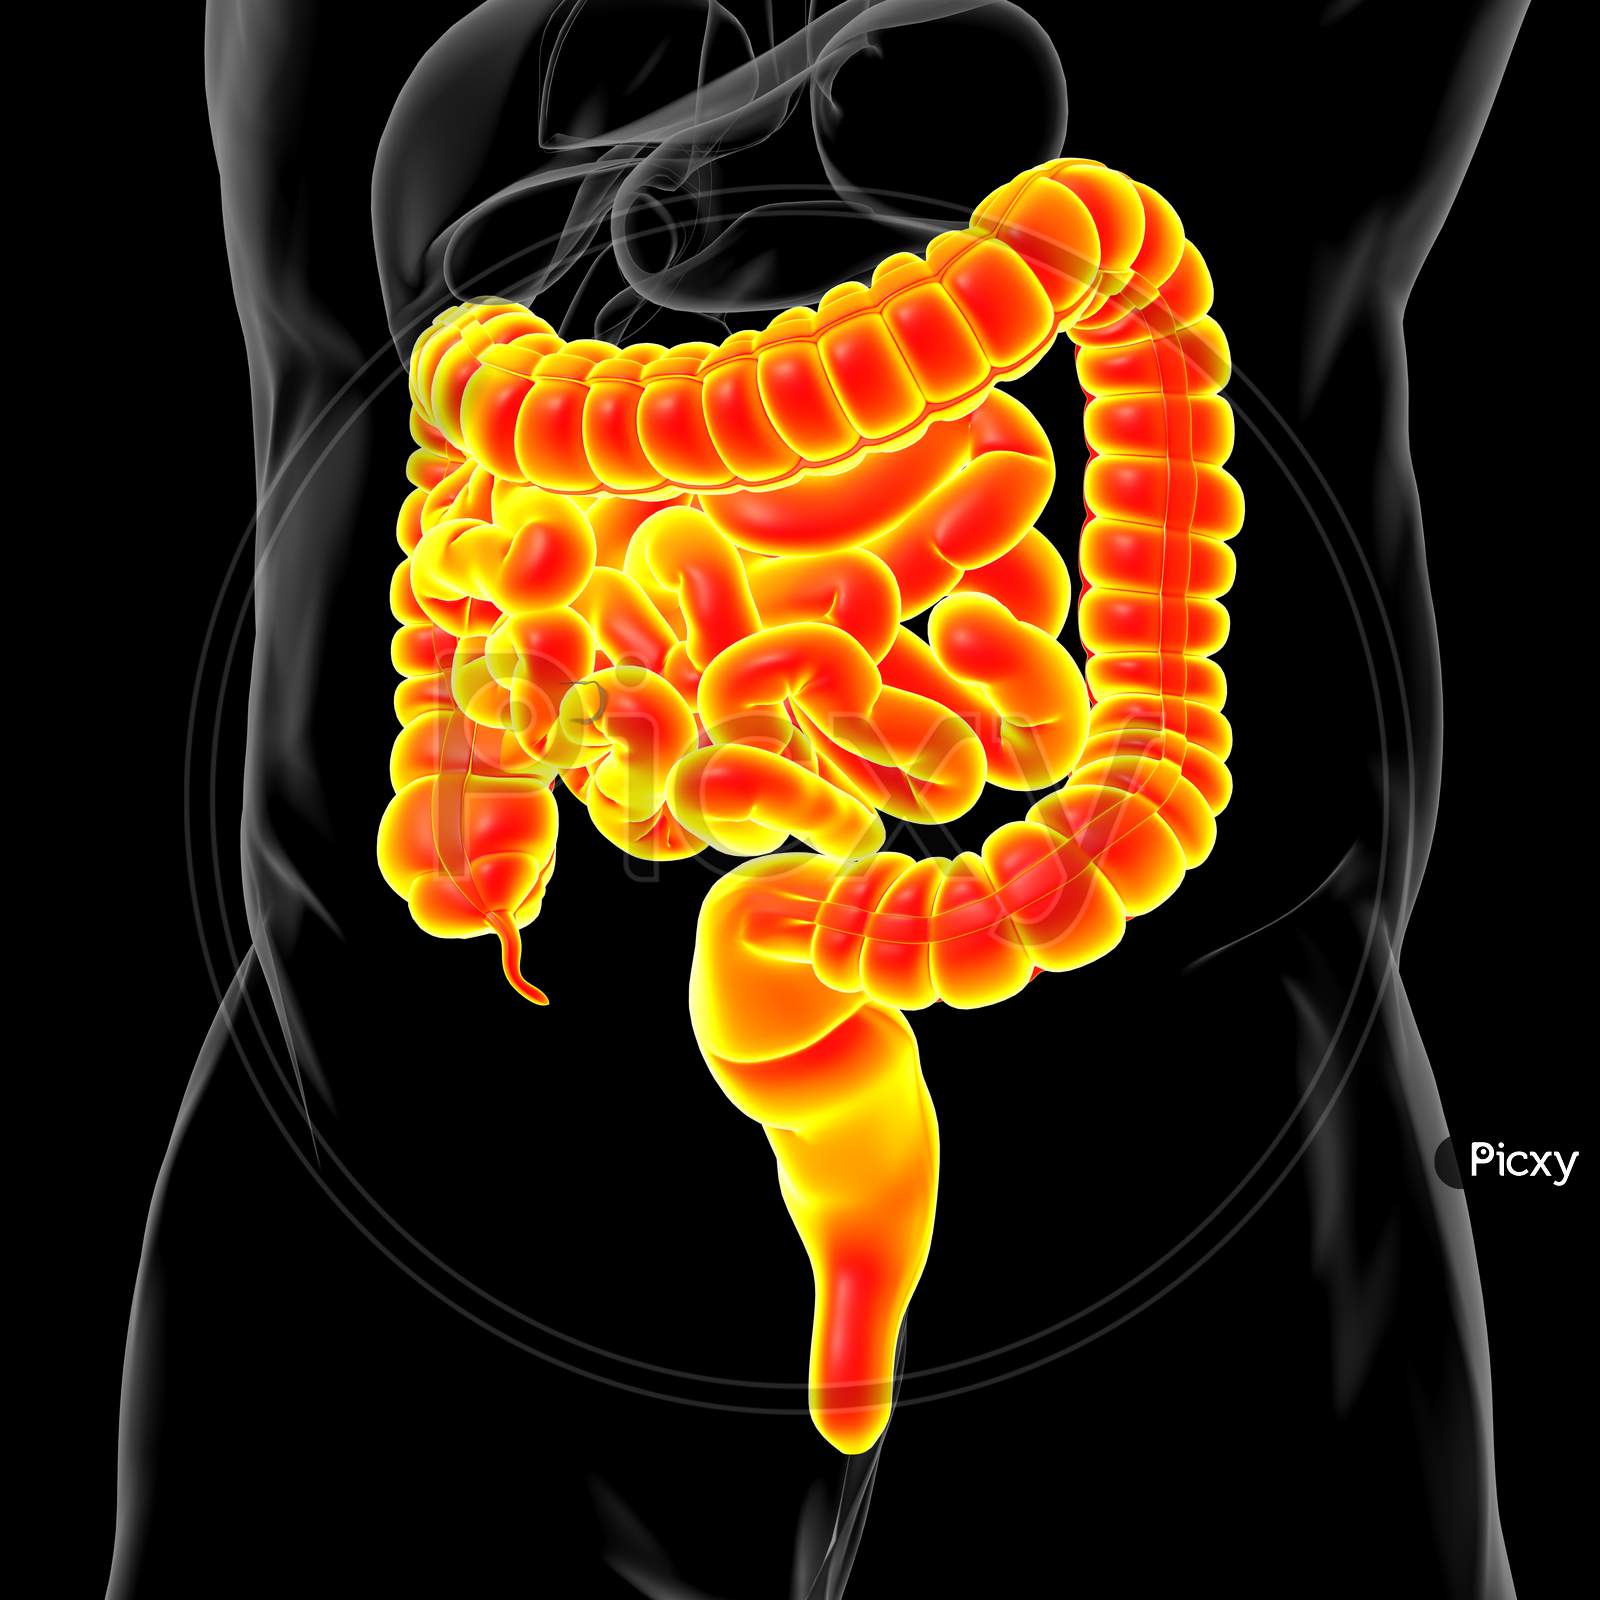 The Large Intestine: Anatomy and 3D Illustrations